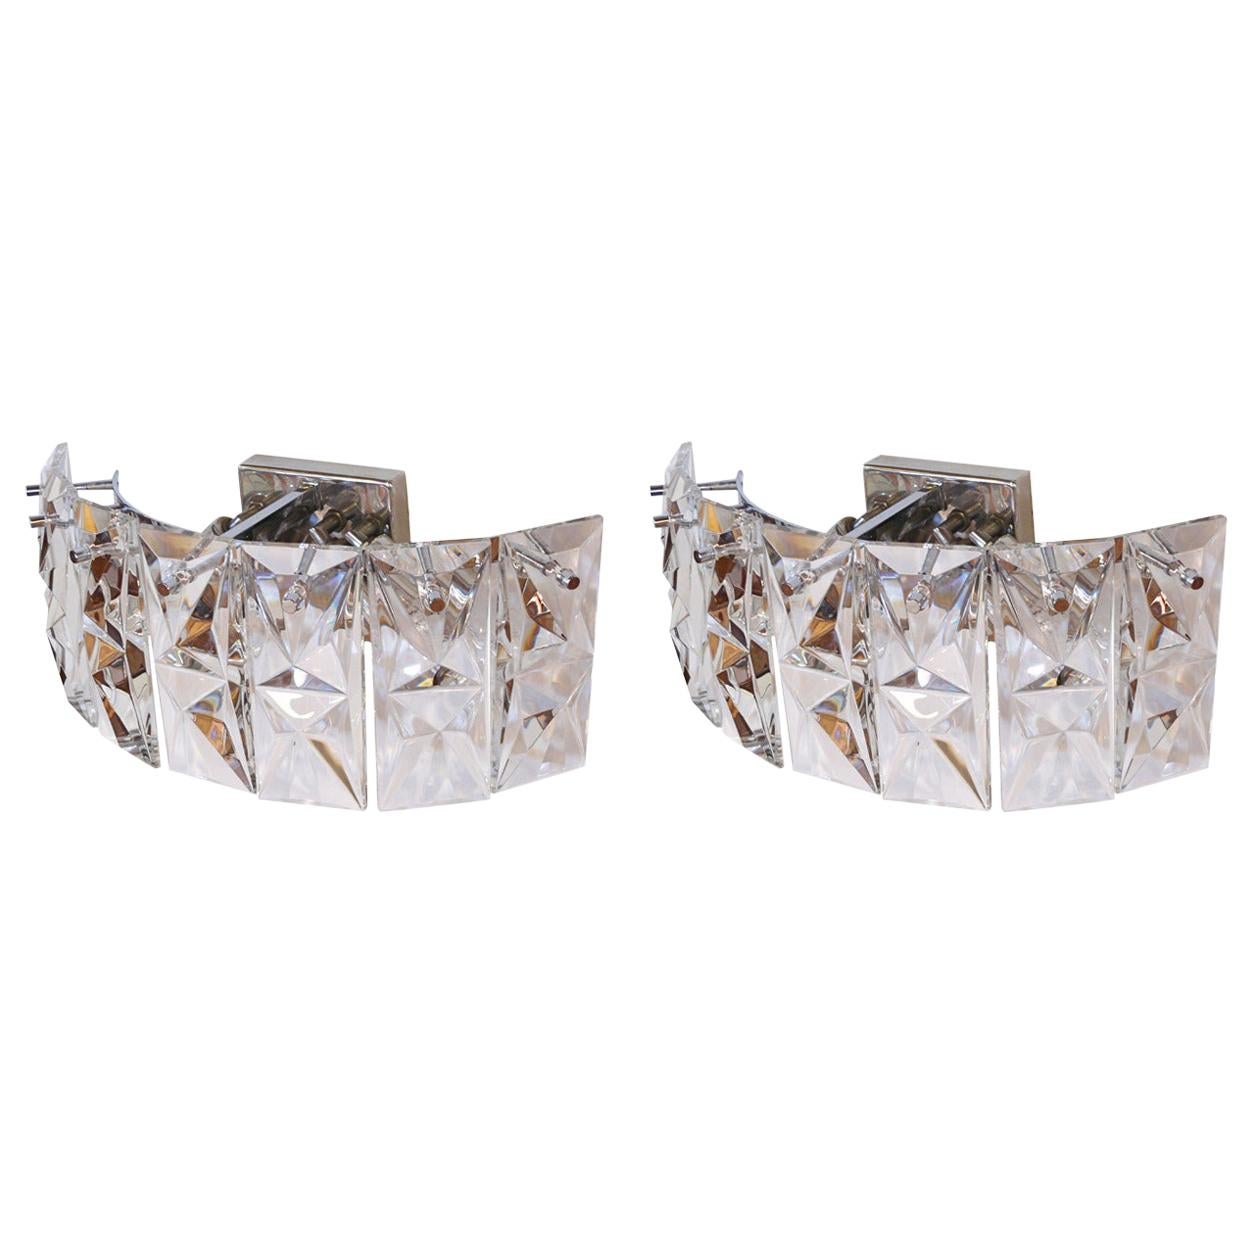 Pair of Prismatic Glass Sconces by Kindeley